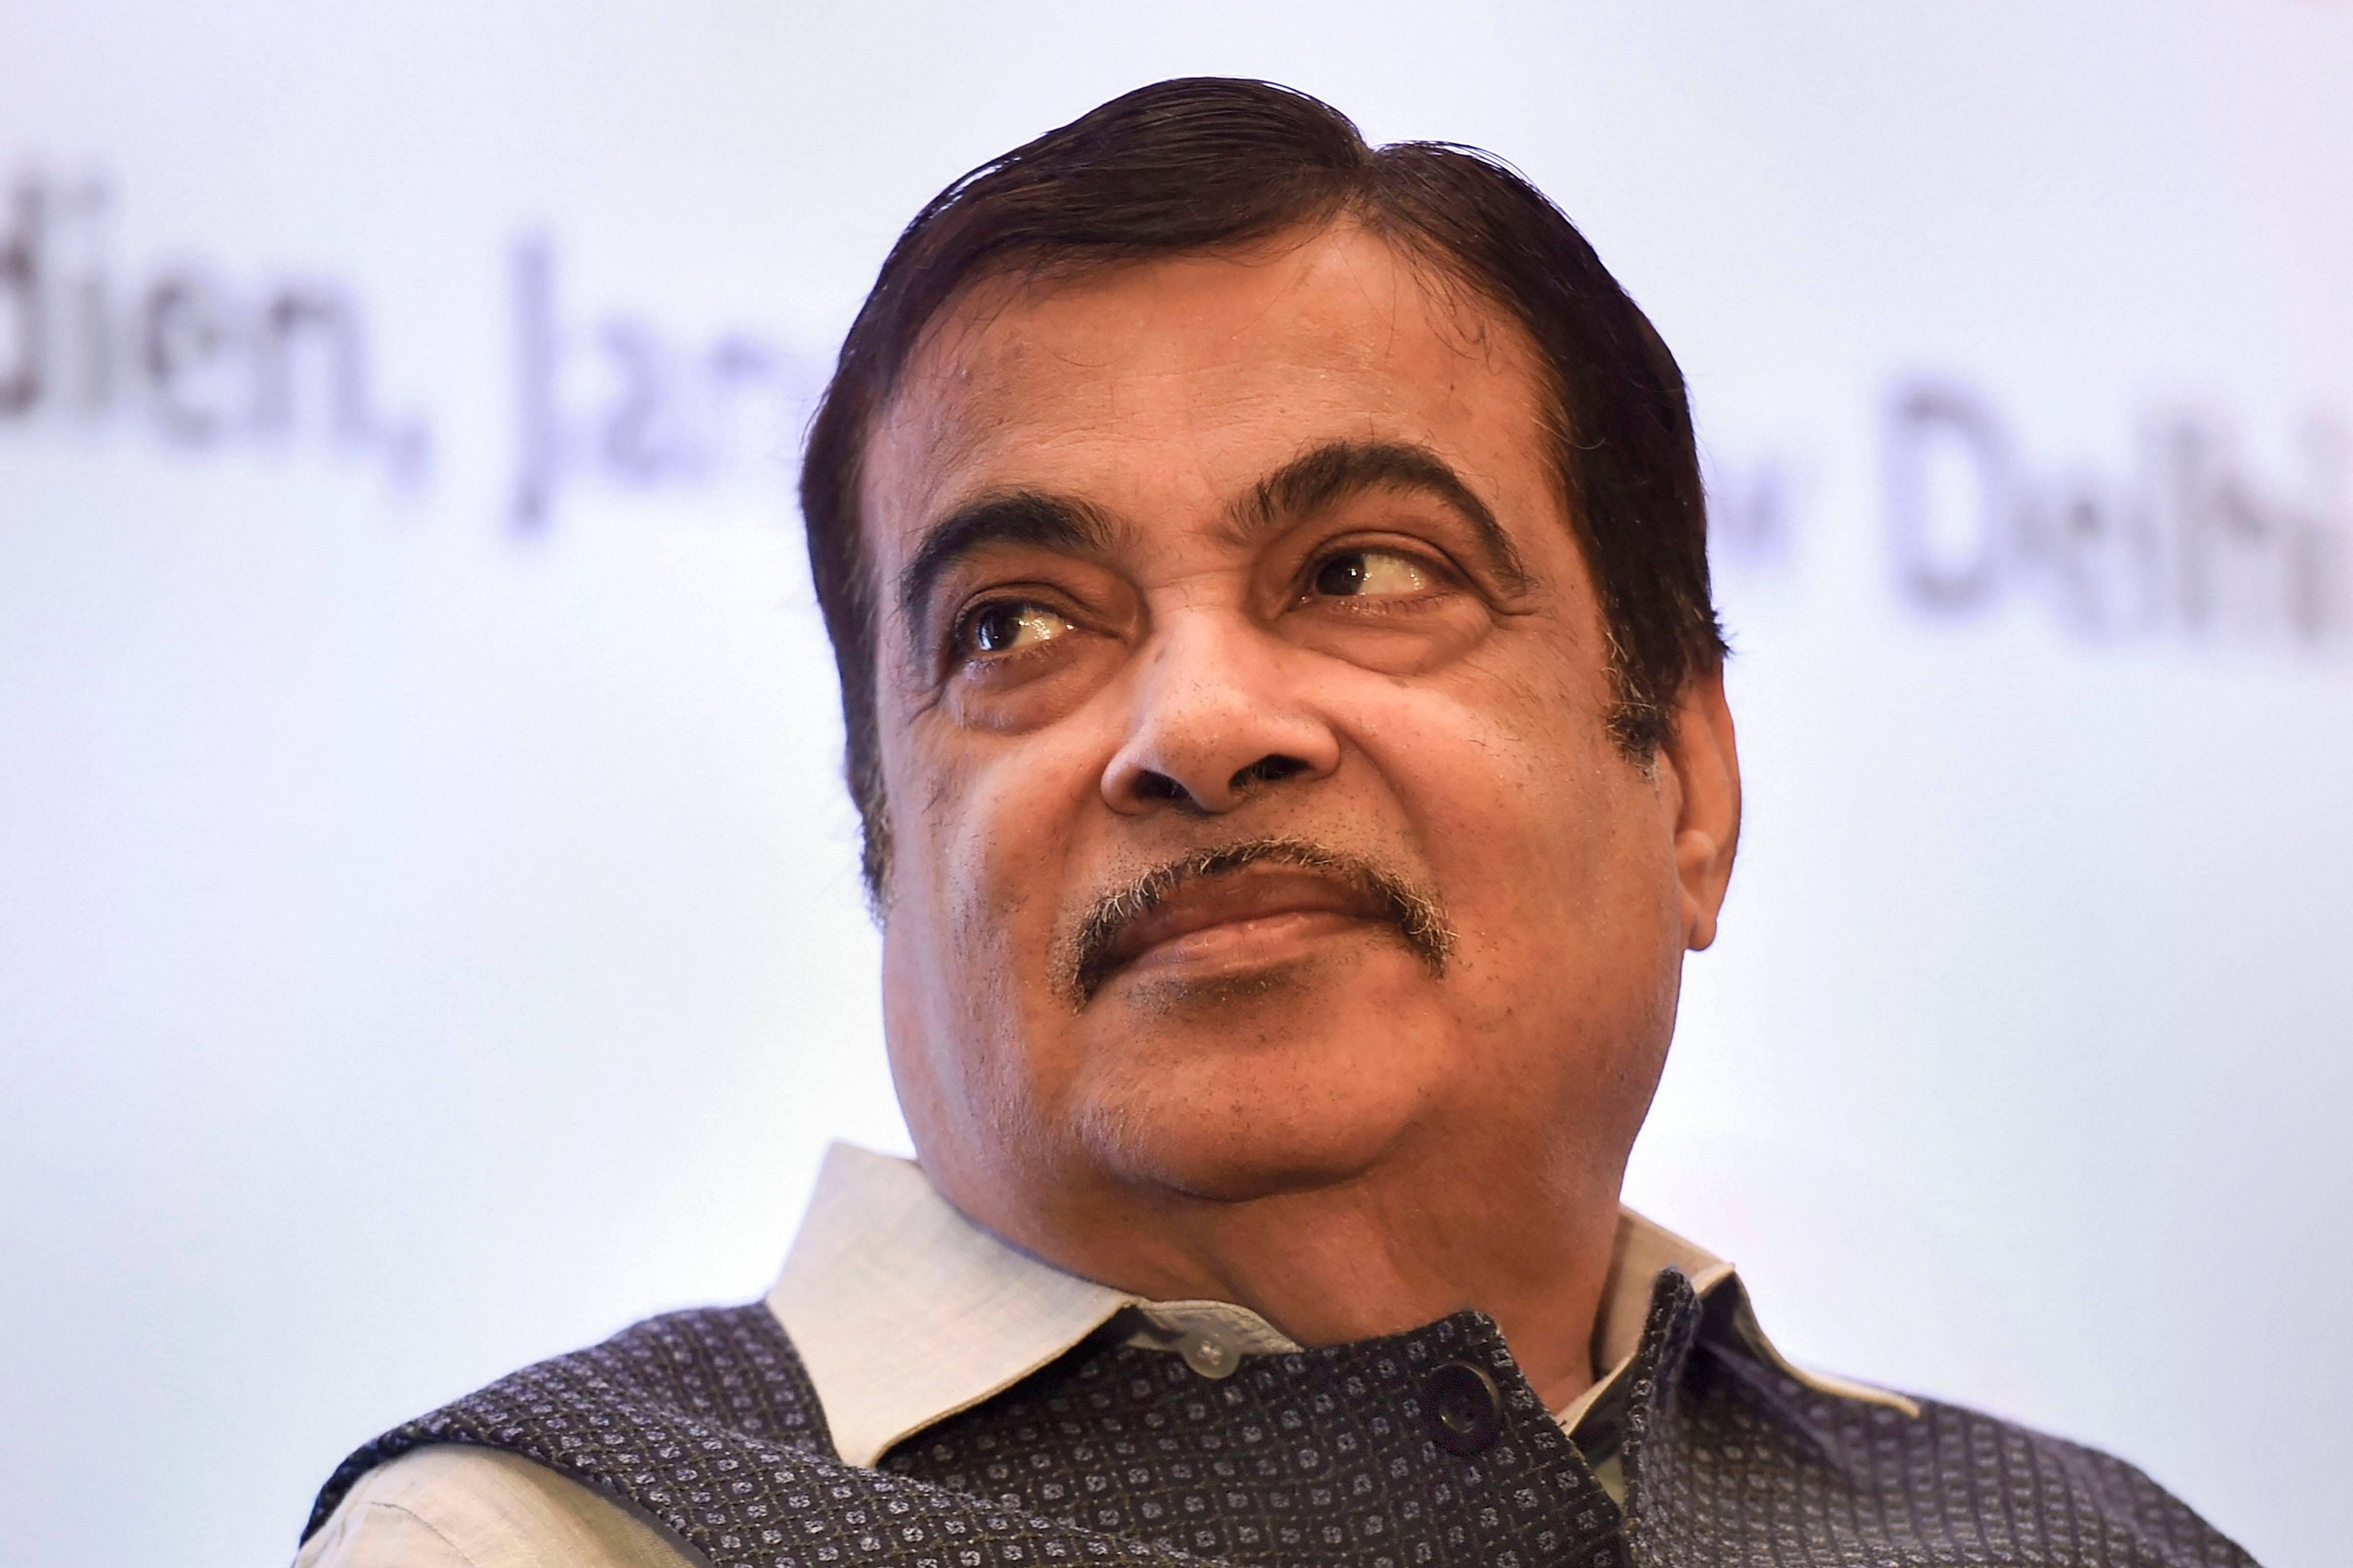 Gadkari said he avoided going out of his home and meeting people. (Credit: PTI Photo)